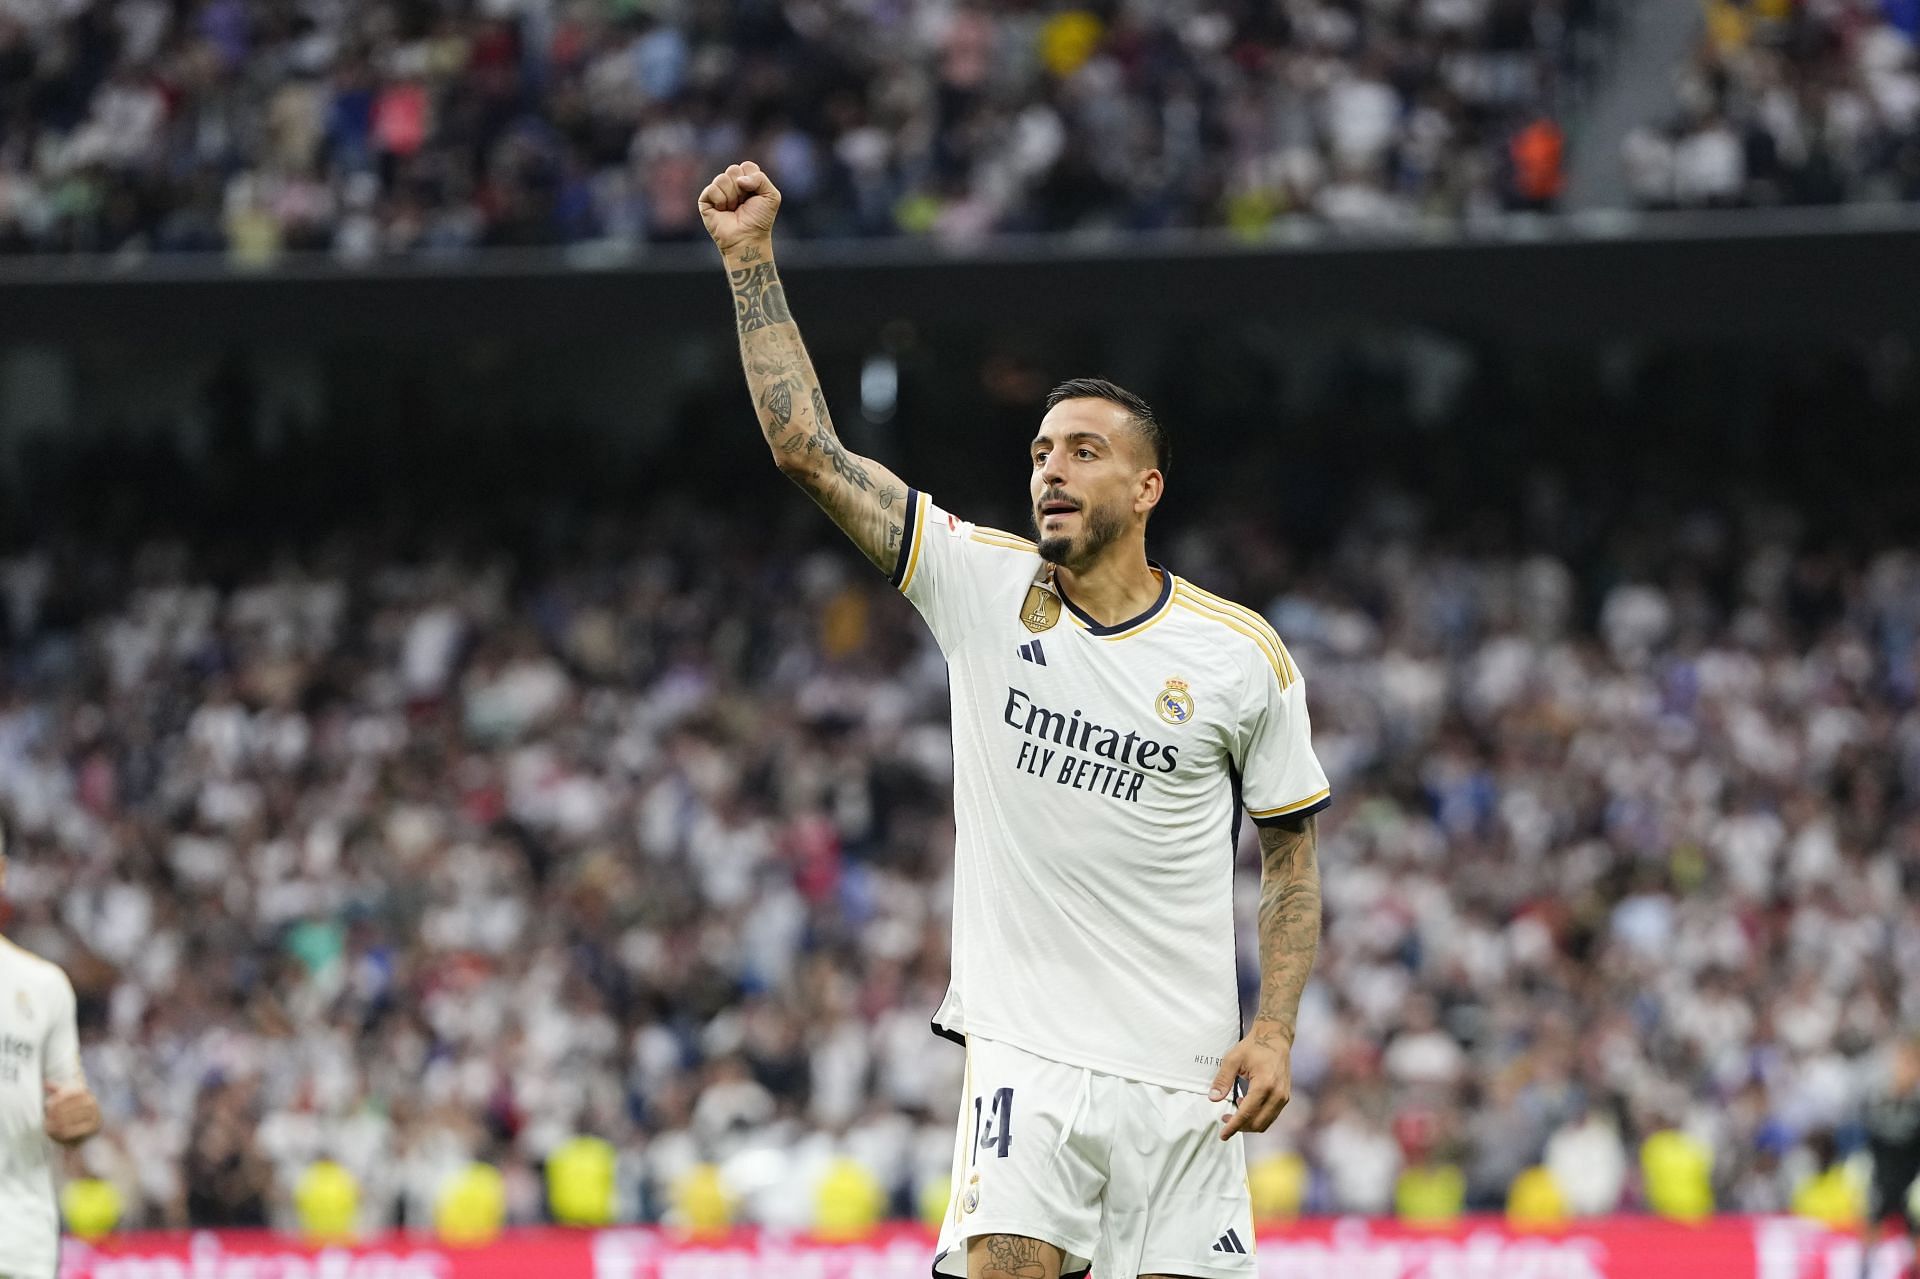 Joselu has slotted in well at the Santiago Bernabeu